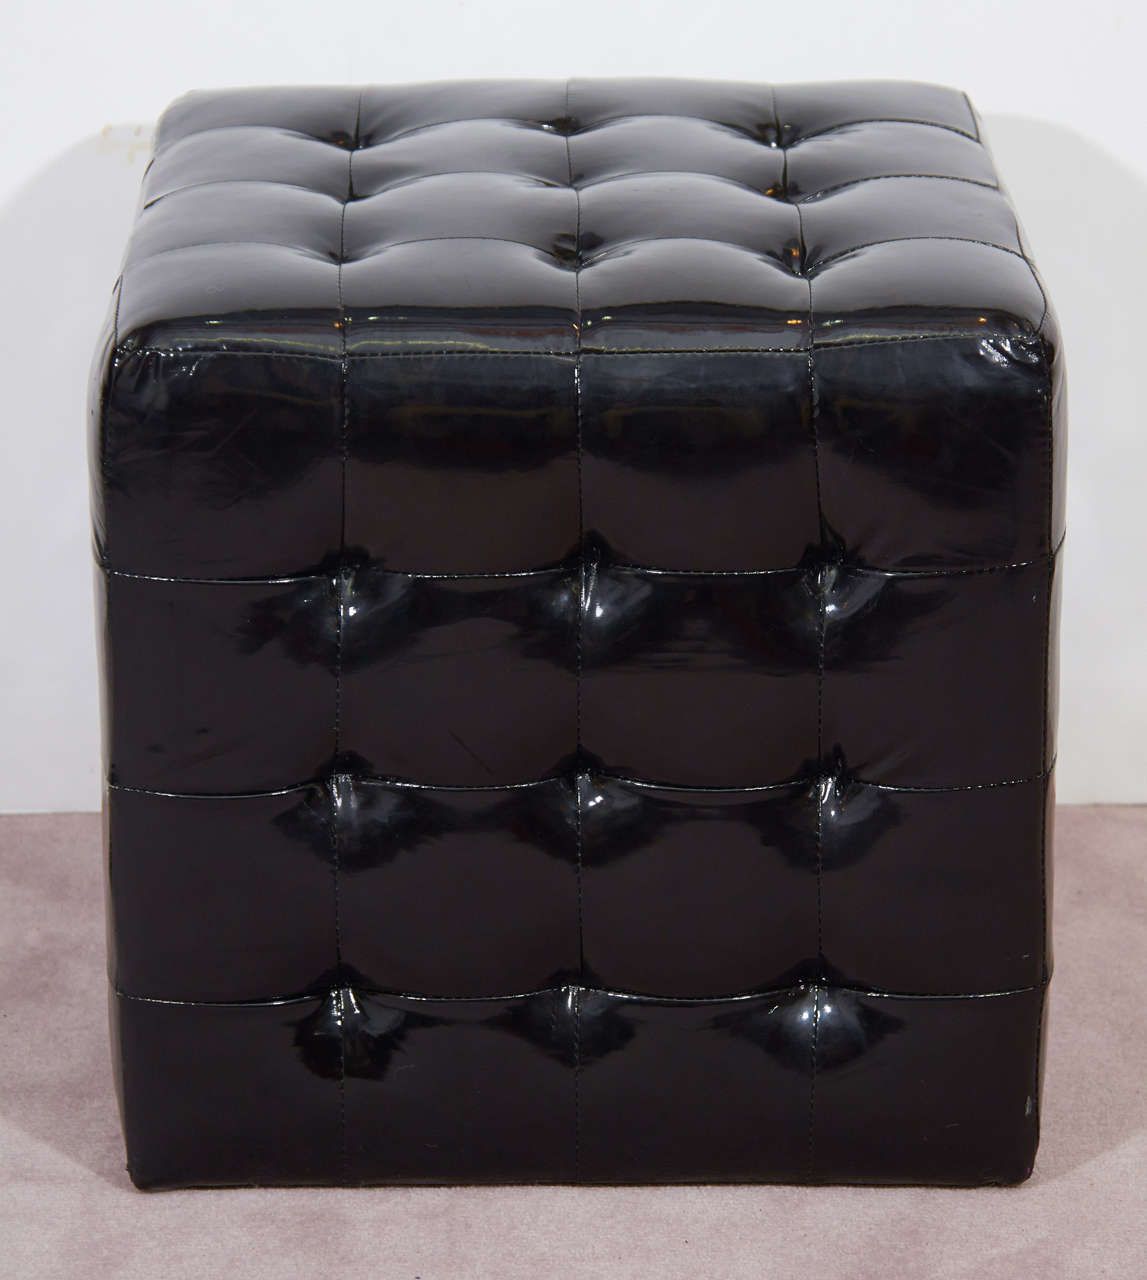 Black Wet Look Faux Leather Tufted Cube Ottomans Or Benches At 1stdibs Intended For Black Faux Leather Column Tufted Ottomans (View 8 of 20)